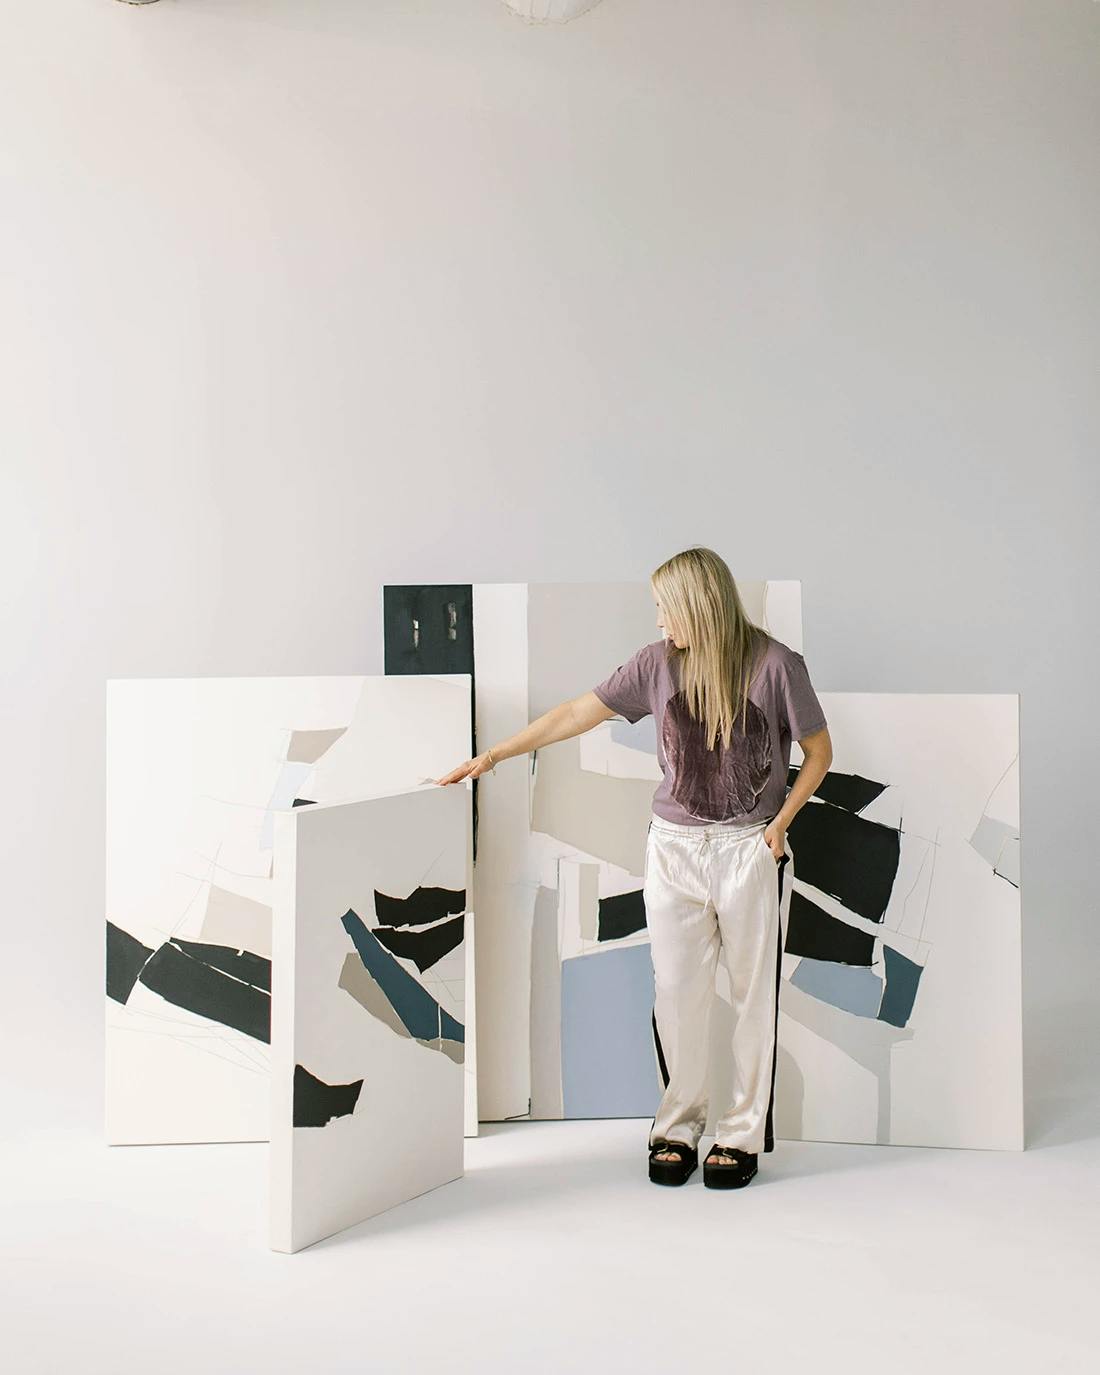 Artist Holly Addi in her studio surrounded by her neutral and blue paintings on canvas.